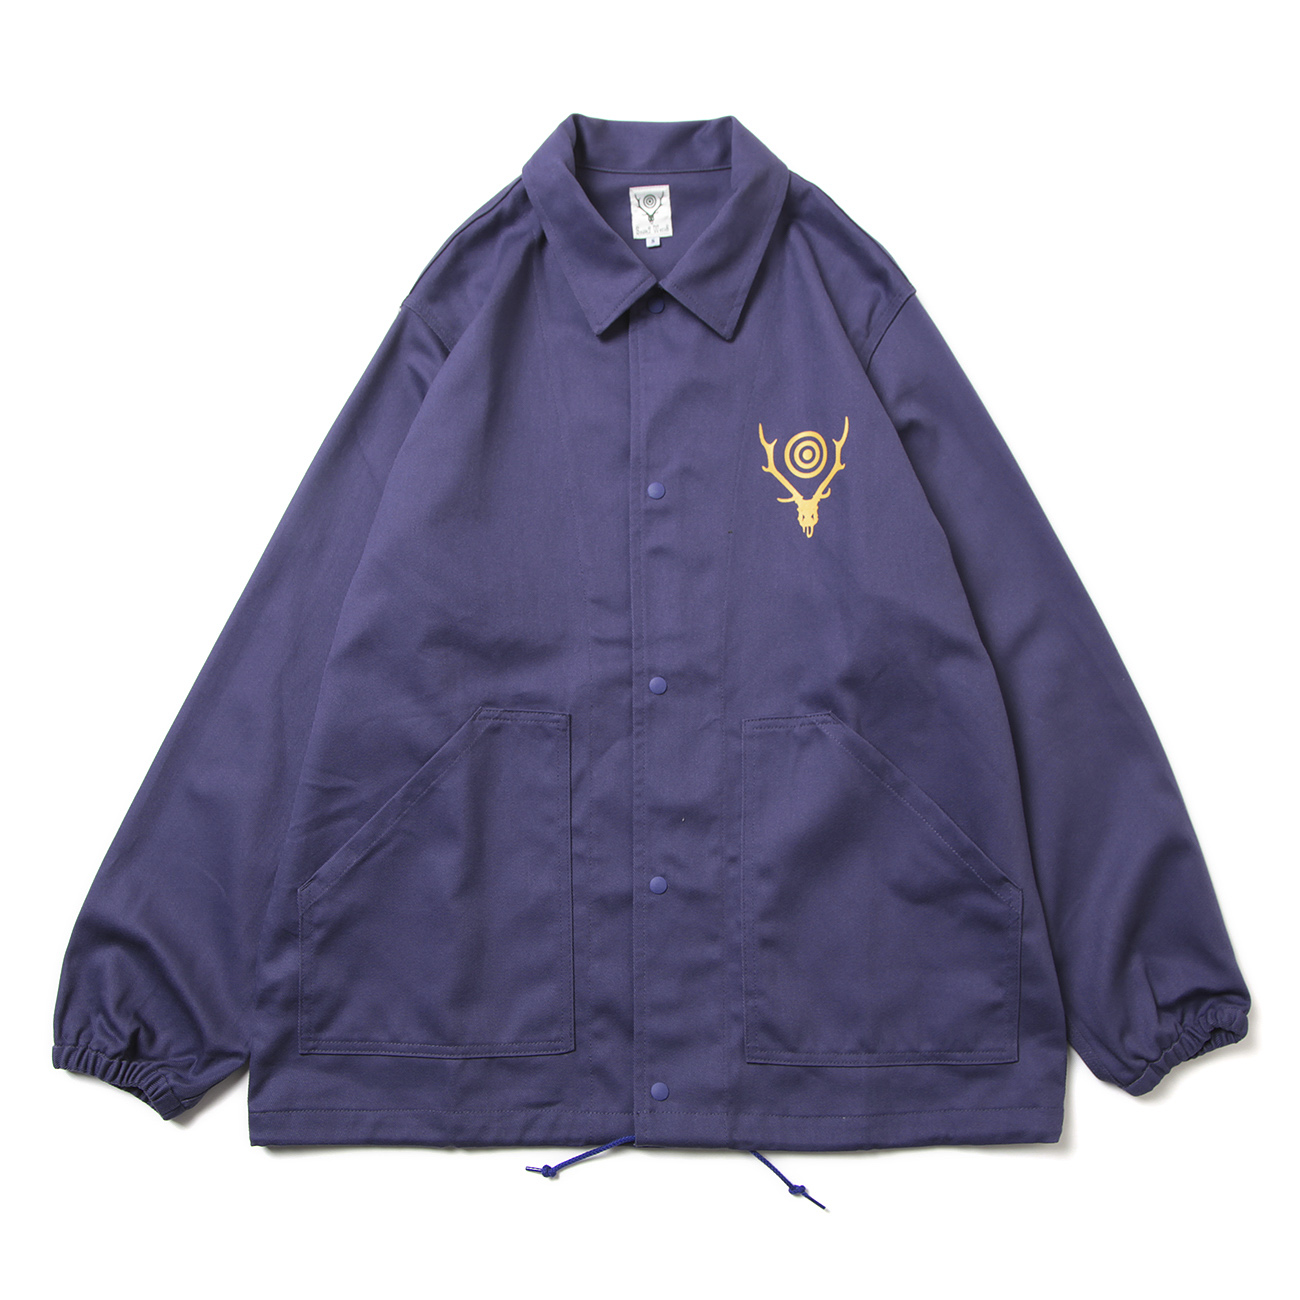 South2 West8 / サウスツーウエストエイト | Coach Jacket - Cotton